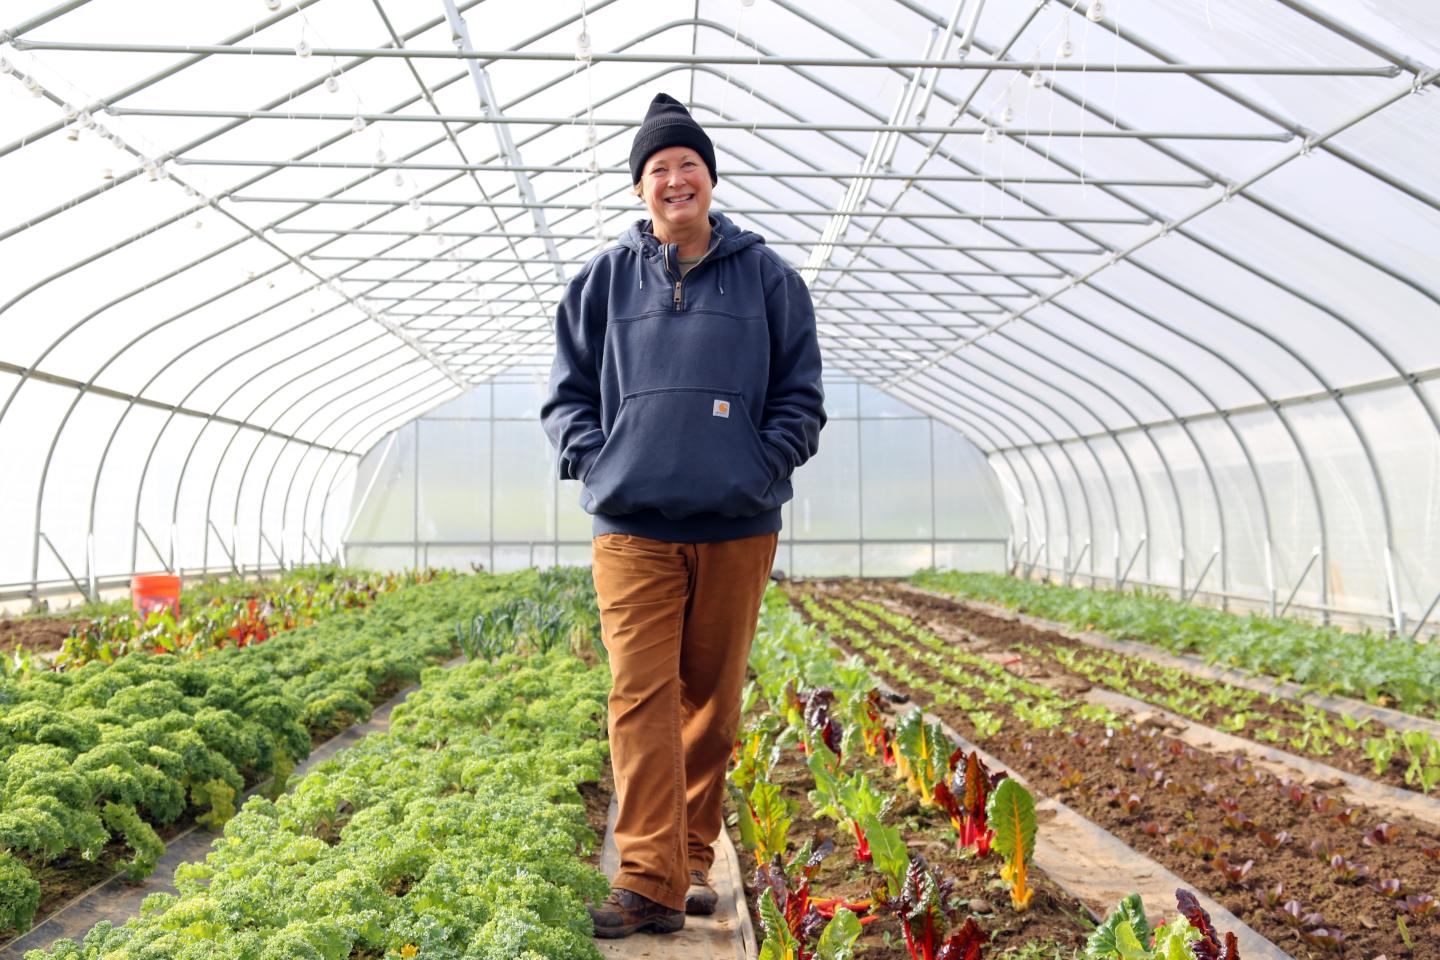 Farmer Jan Johnson stands in a high tunnel with crops.